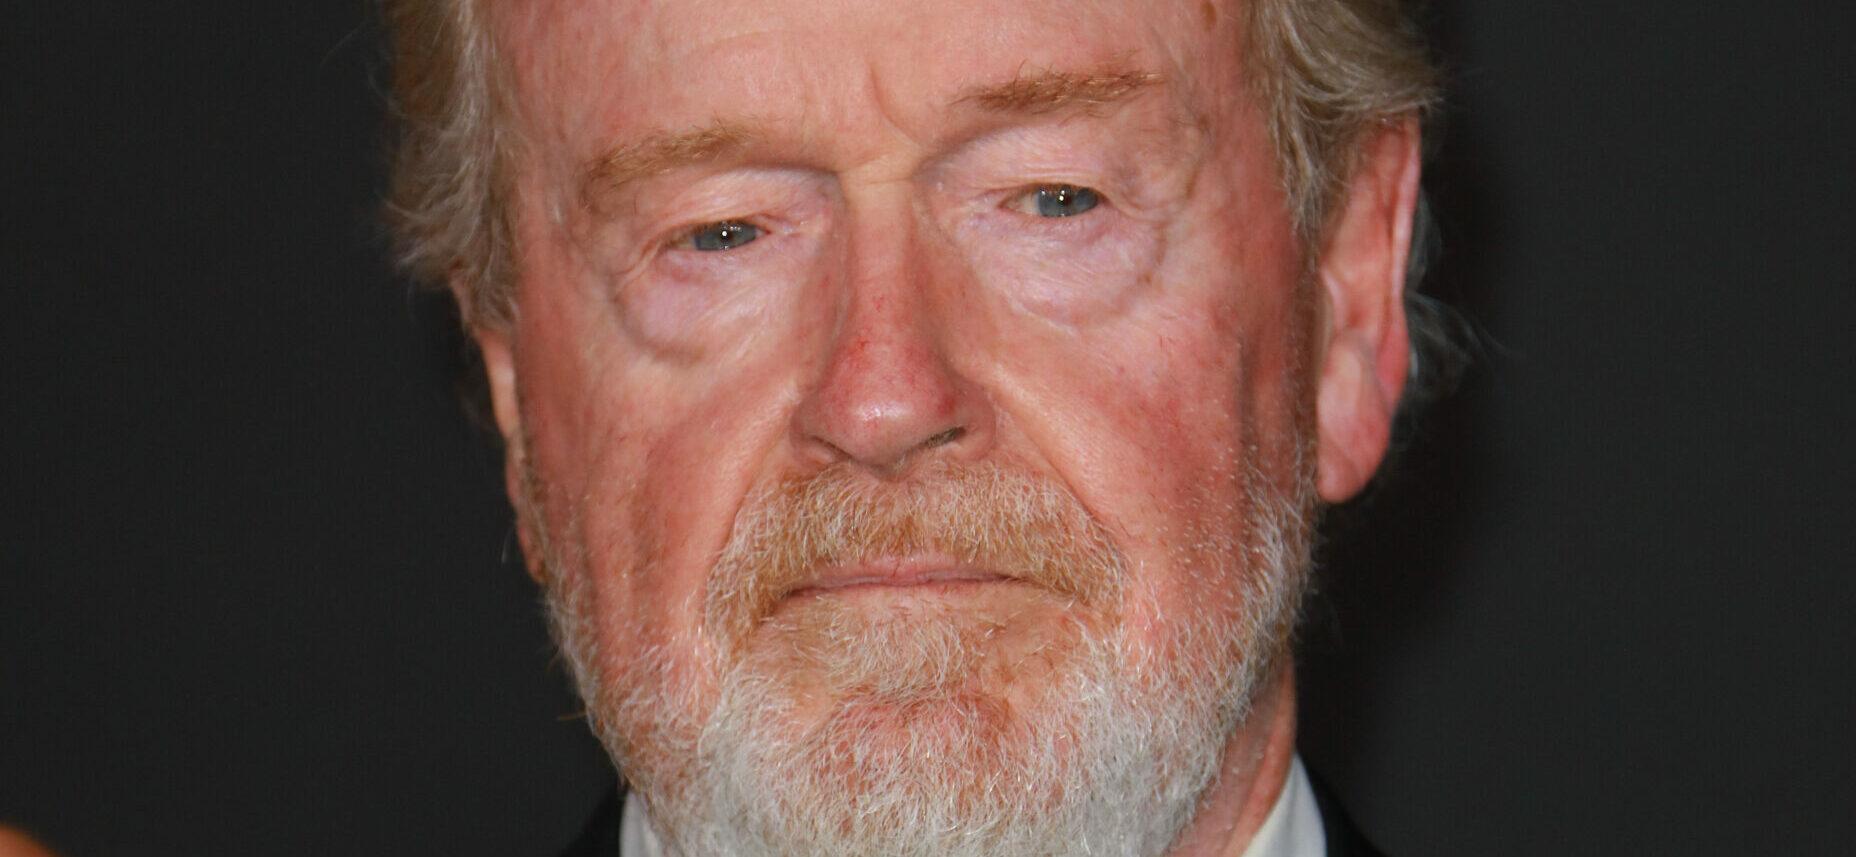 Ridley Scott Attending The 10th Annual LACMA ART+FILM GALA Presented By Gucci in Los Angeles